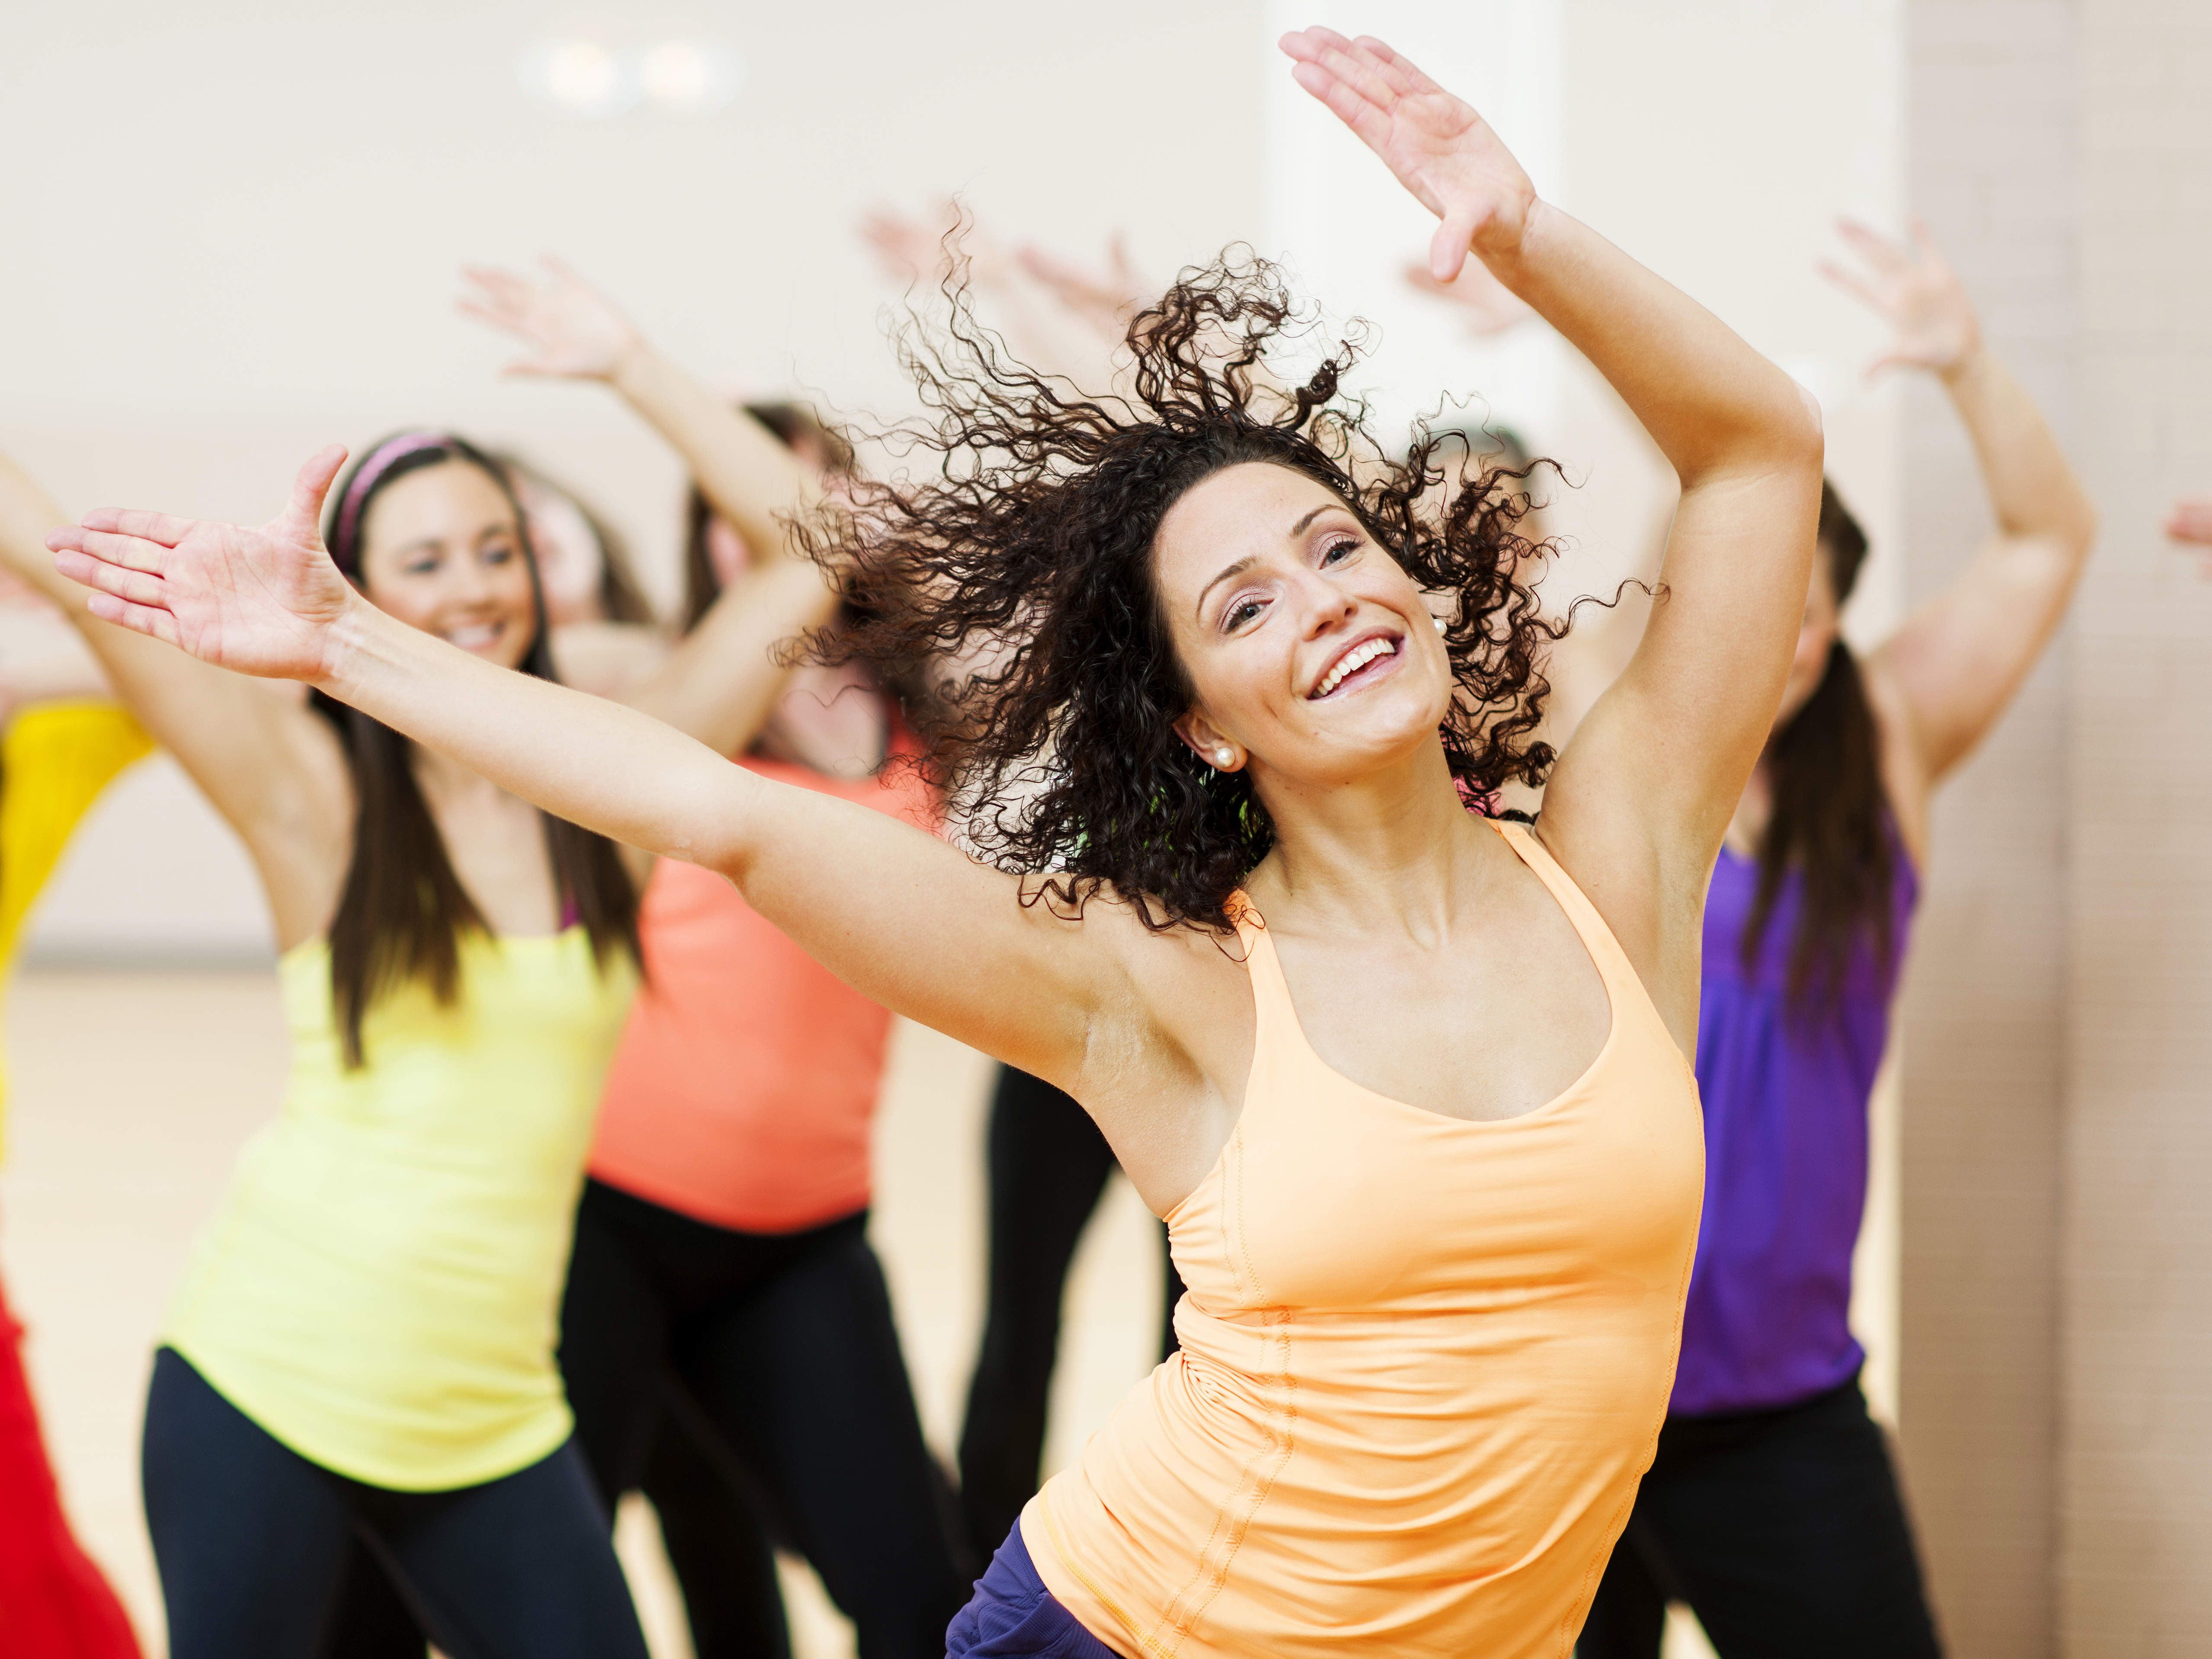 Try the Dance Cardio Workout That Inspired Zumba